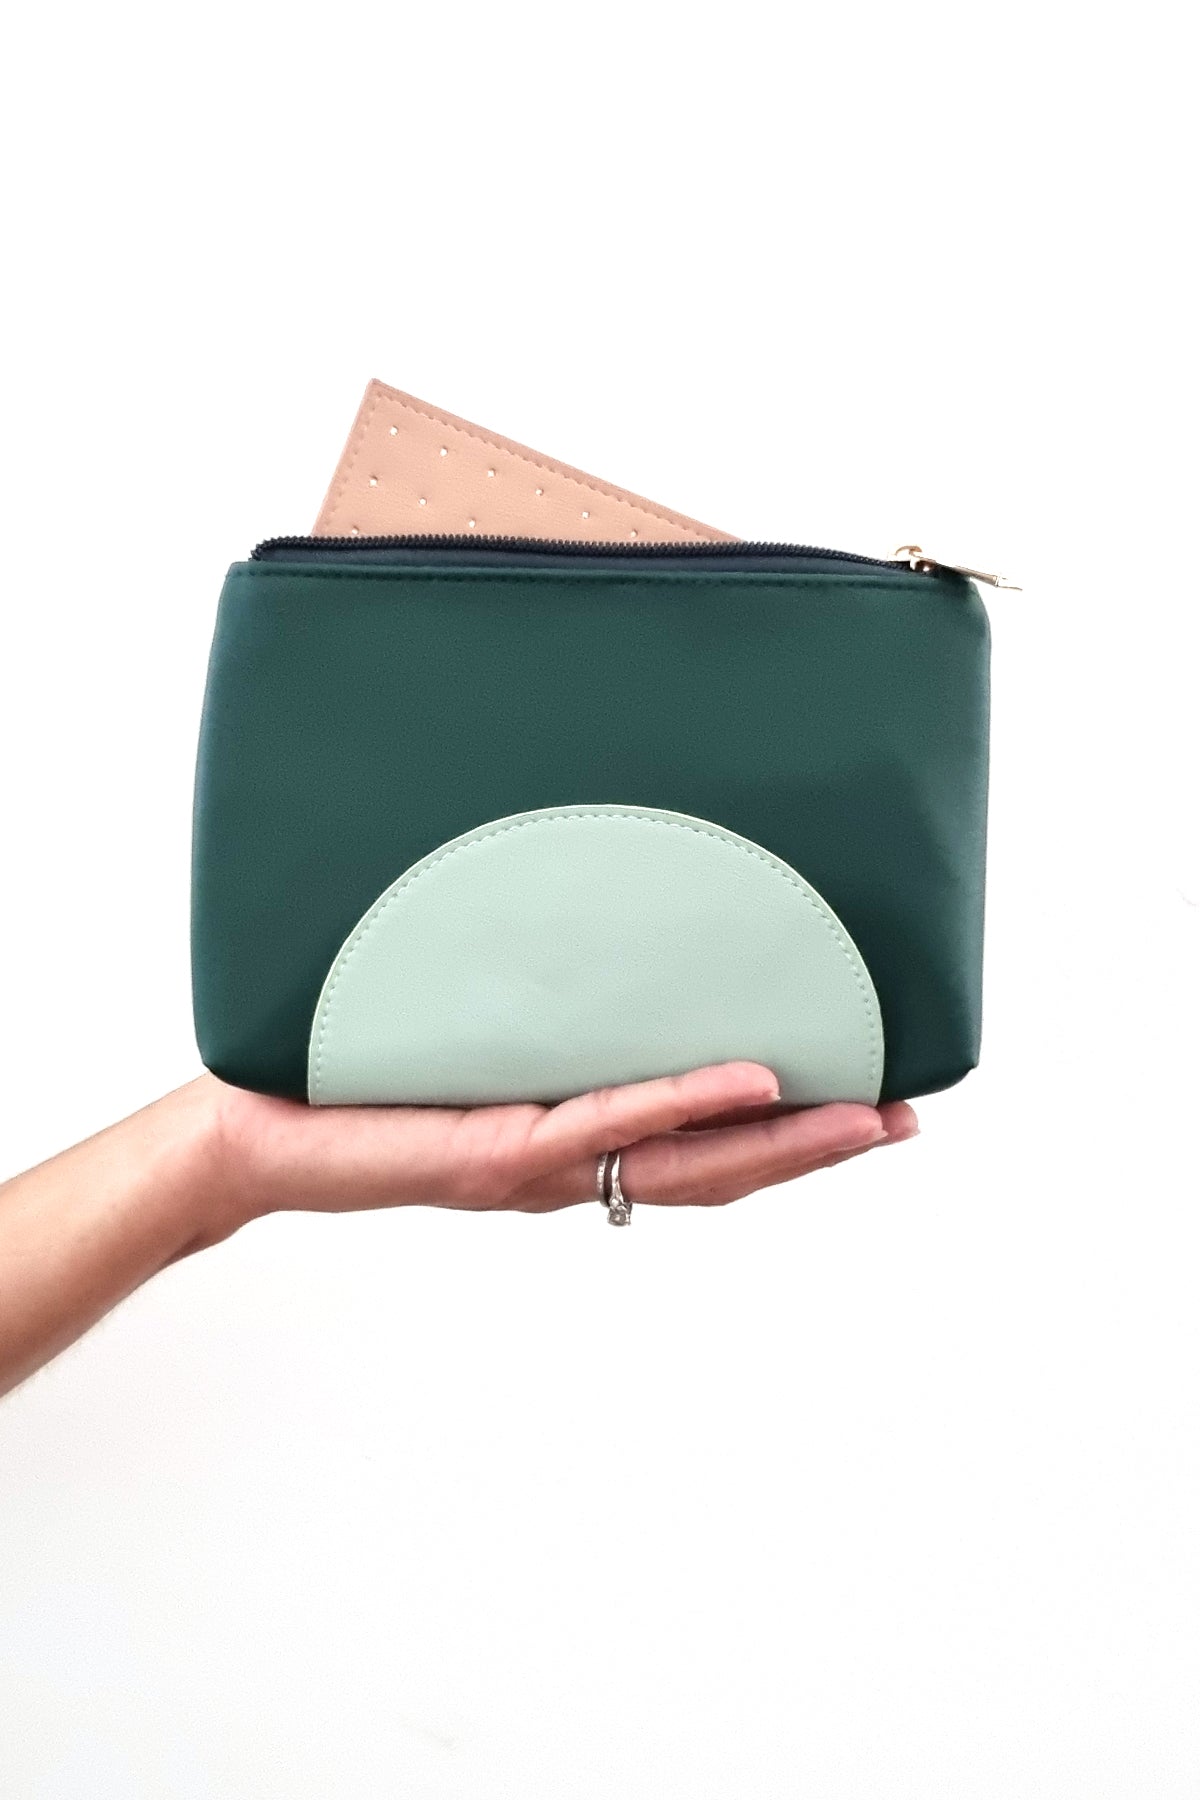 An outstretched hand holds a forest green purse against a white background. The purse has a duckegg half circle on the bottom and a gold zip, it has a peach perforated insert poking out the top of the open zip.